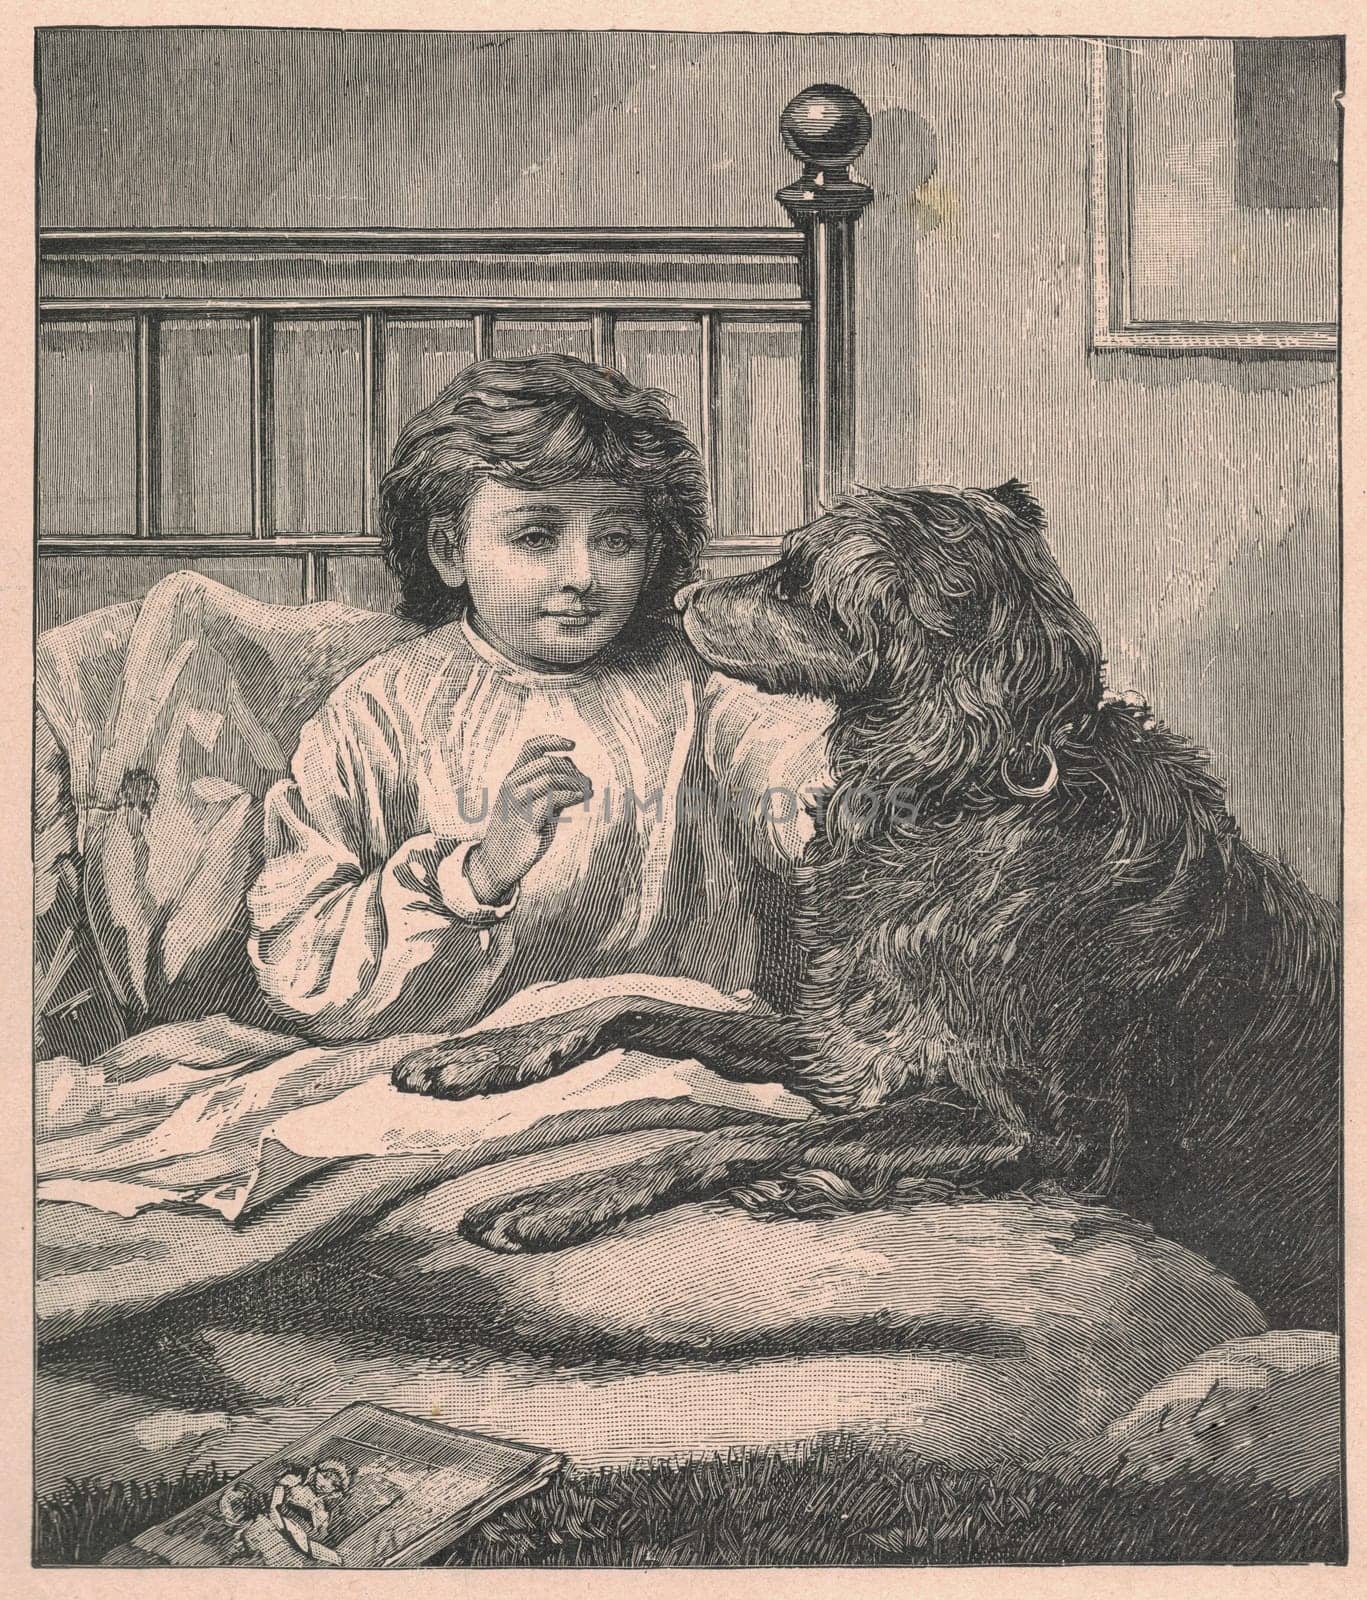 Black and white antique illustration shows a little boy with a dog in the bedroom. Vintage drawing shows the small boy with a dog in the bedroom. Old picture from fairy tale book. Storybook illustration published 1910. A fairy tale, fairytale, wonder tale, magic tale, fairy story or Marchen is an instance of folklore genre that takes the form of a short story. Such stories typically feature mythical entities such as dwarfs, dragons, elves, fairies and Peris, giants, Divs, gnomes, goblins, griffins, mermaids, talking animals, trolls, unicorns, or witches, and usually magic or enchantments.